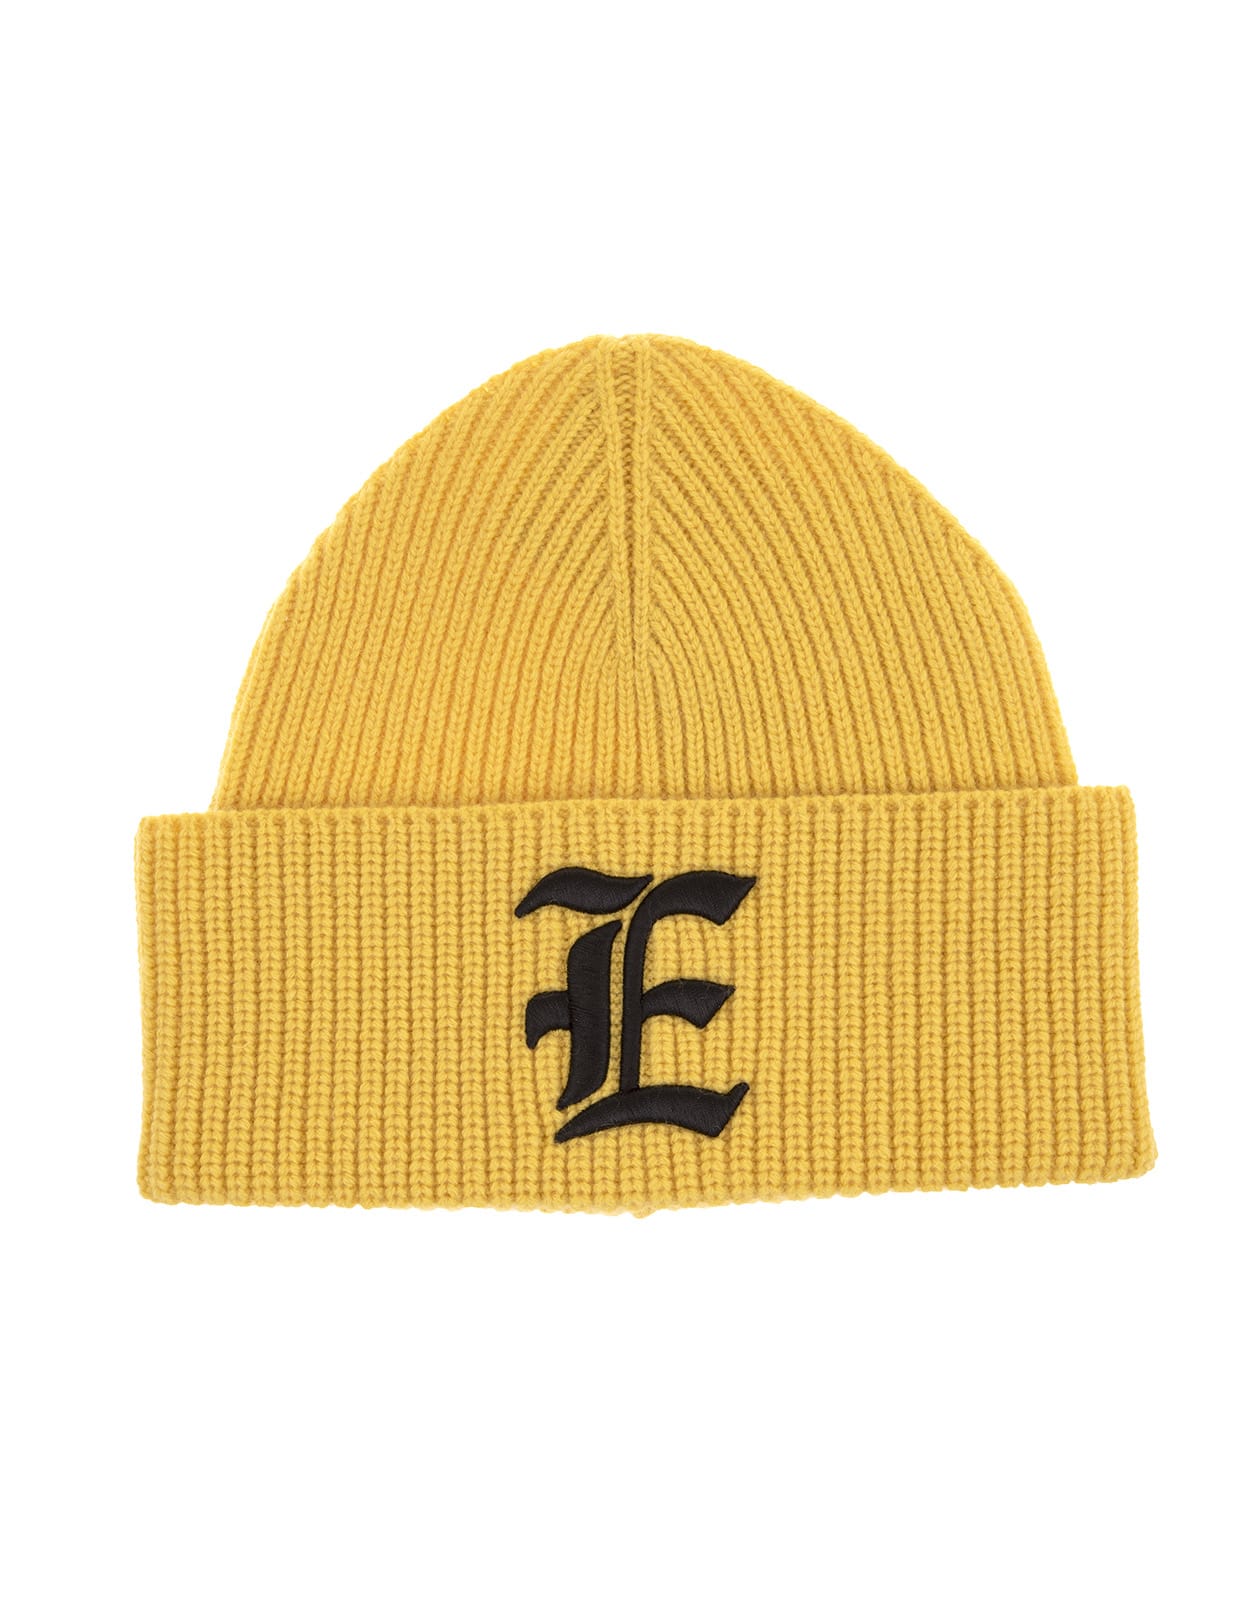 Ermanno Scervino yellow beanie in ribbed knit with monogram logo